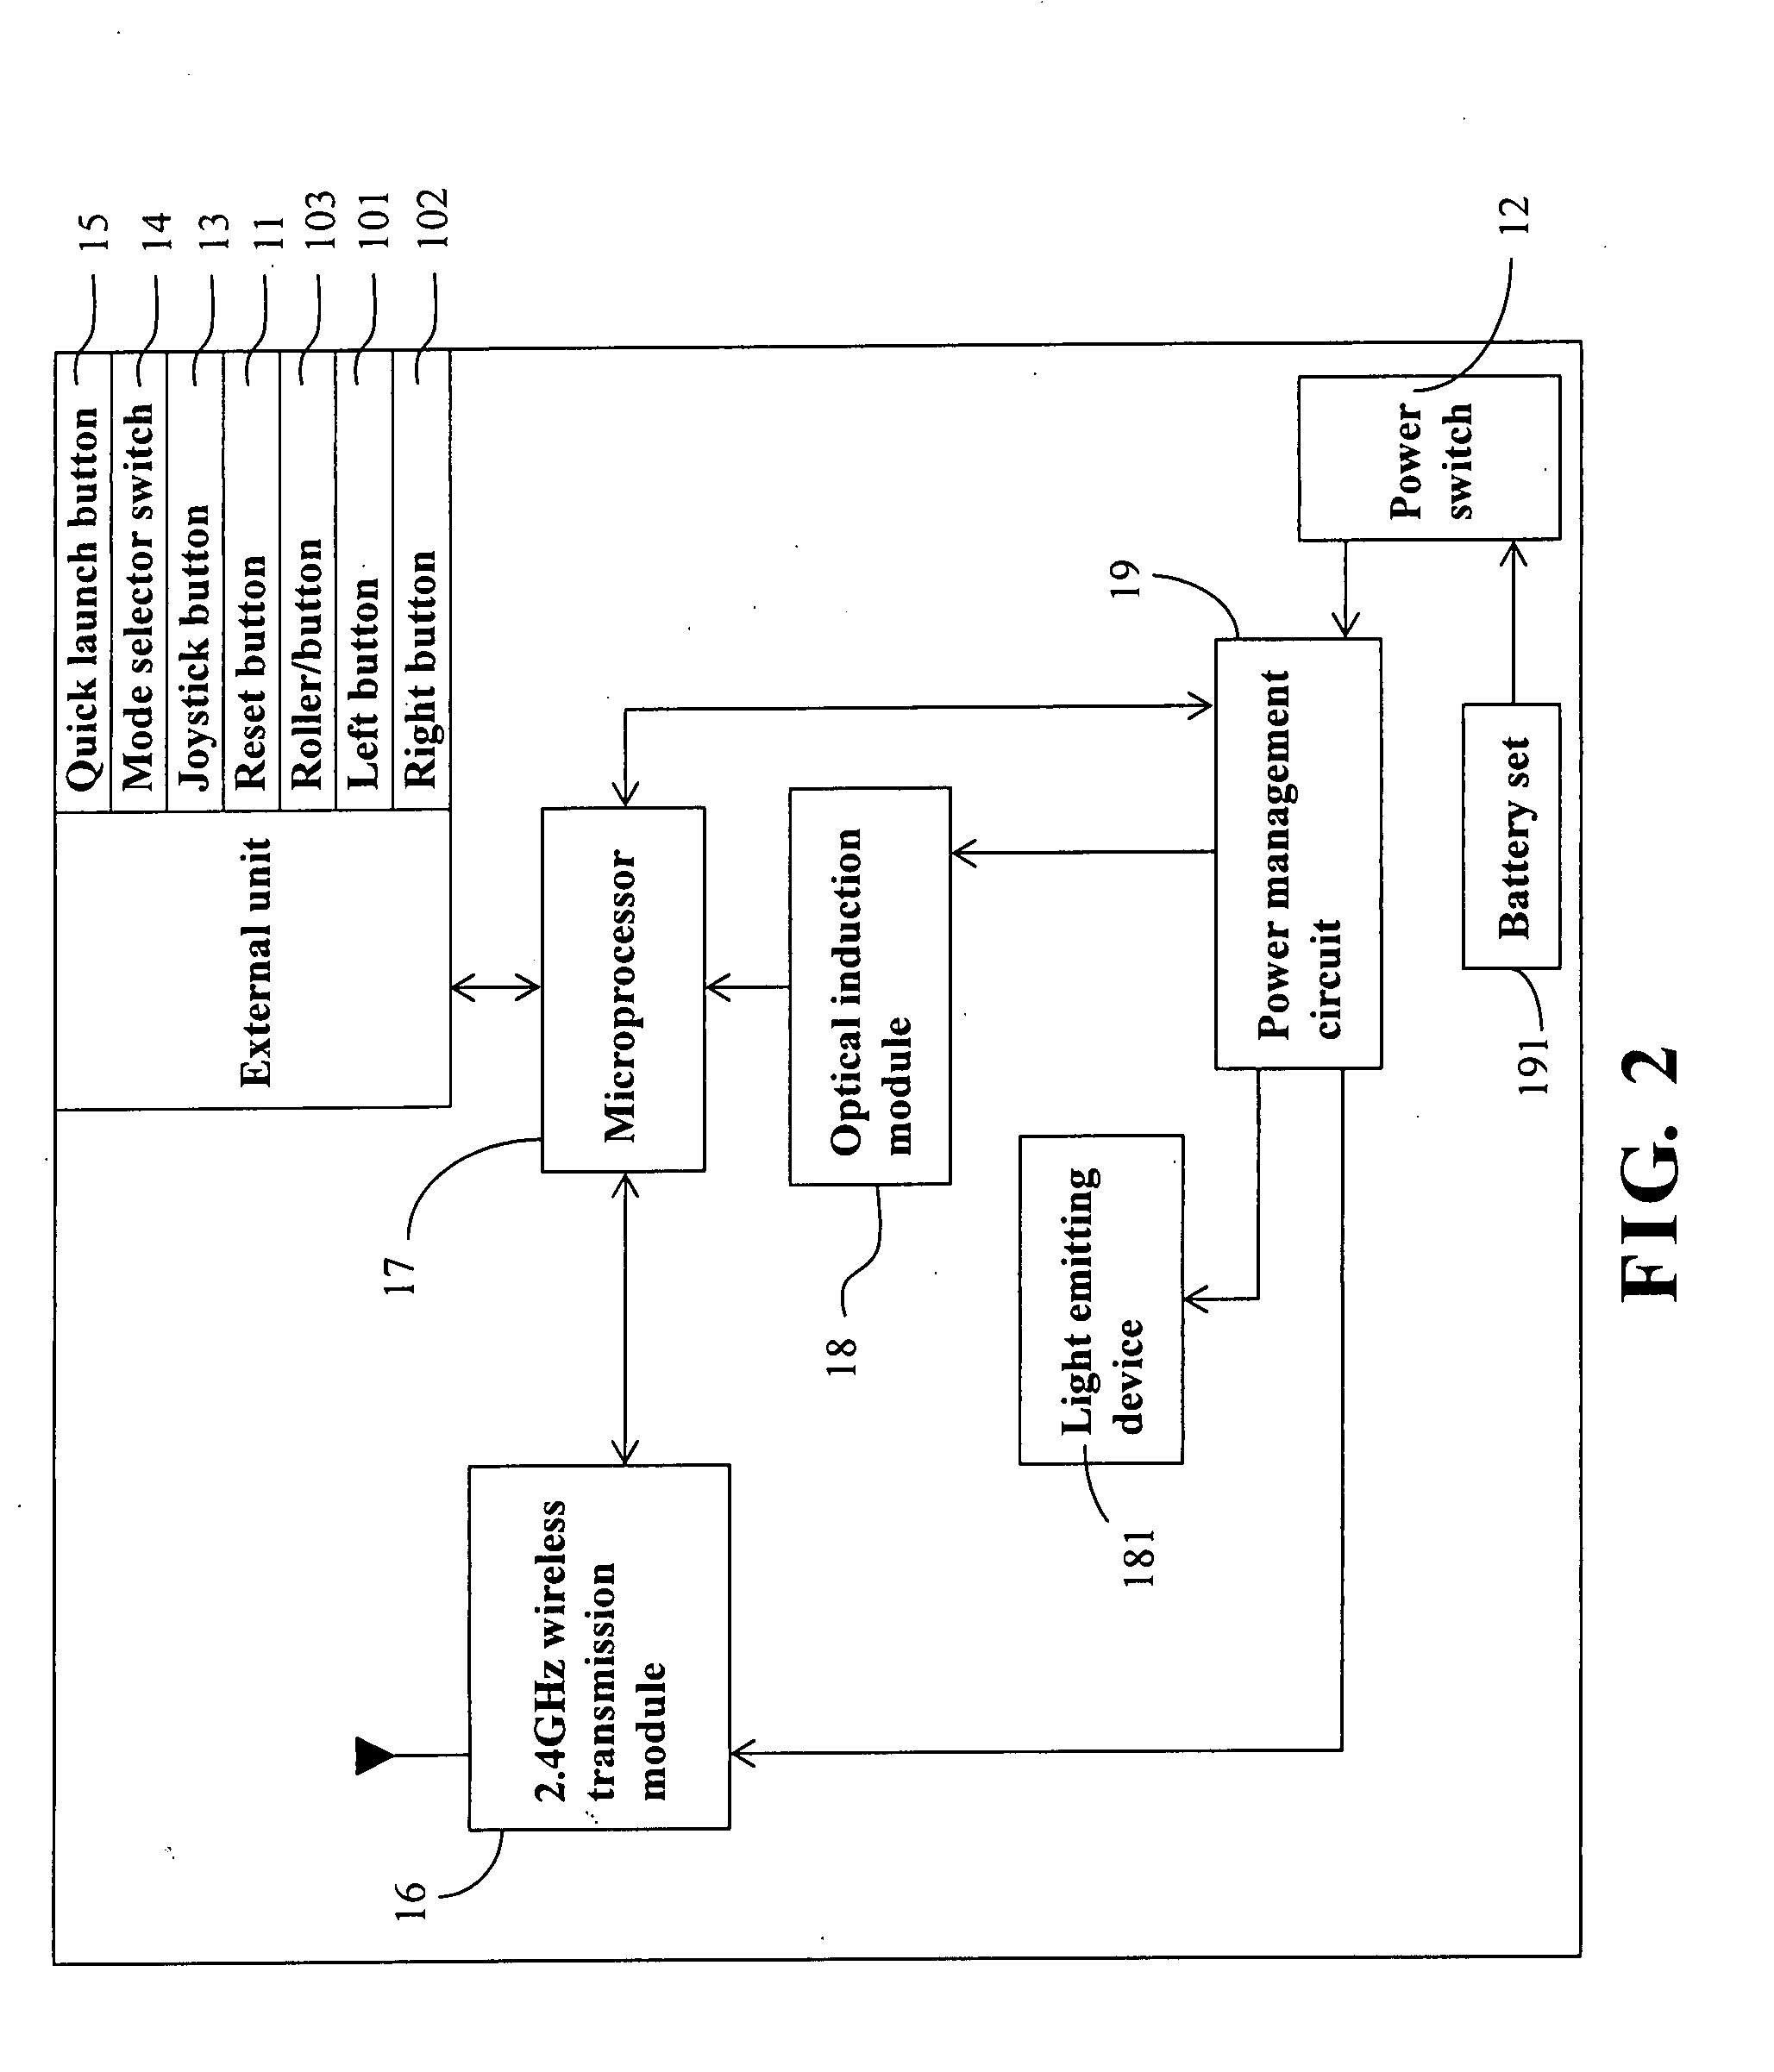 Wireless mousecapable of controlling a handheld wireless communication apparatus